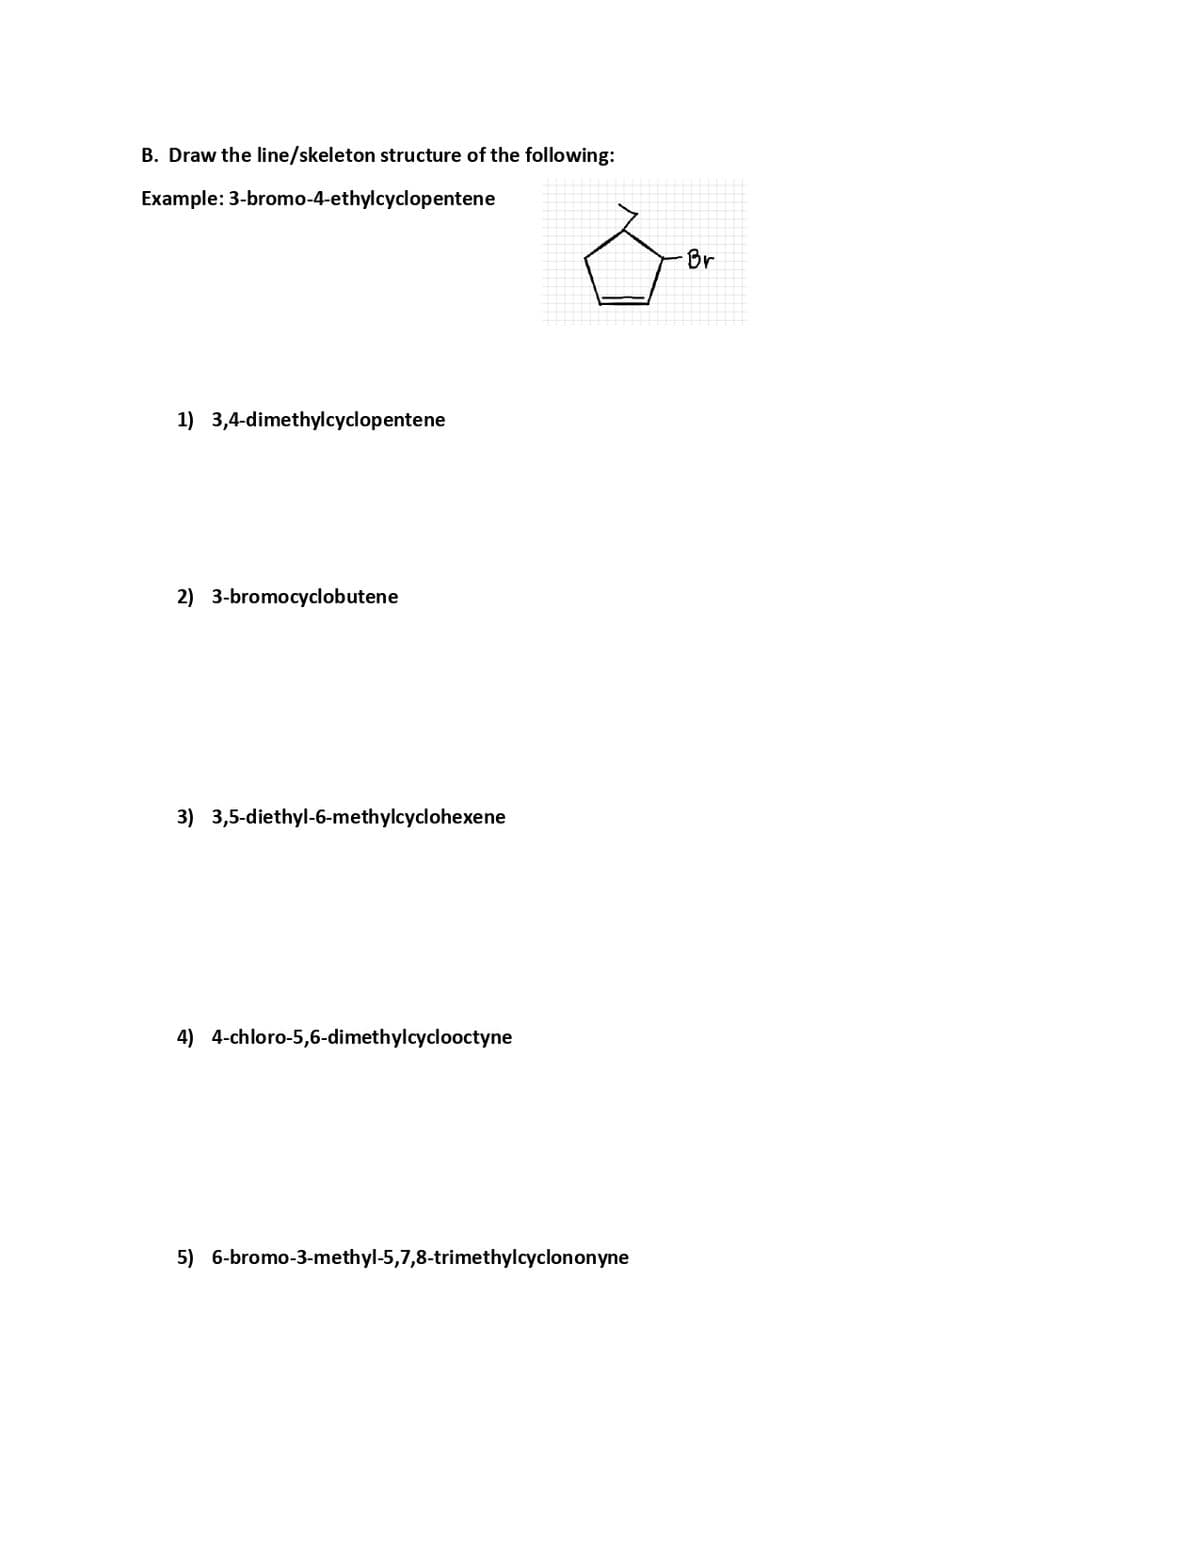 B. Draw the line/skeleton structure of the following:
Example: 3-bromo-4-ethylcyclopentene
Br
1) 3,4-dimethylcyclopentene
2) 3-bromocyclobutene
3) 3,5-diethyl-6-methylcyclohexene
4) 4-chloro-5,6-dimethylcyclooctyne
5) 6-bromo-3-methyl-5,7,8-trimethylcyclononyne
